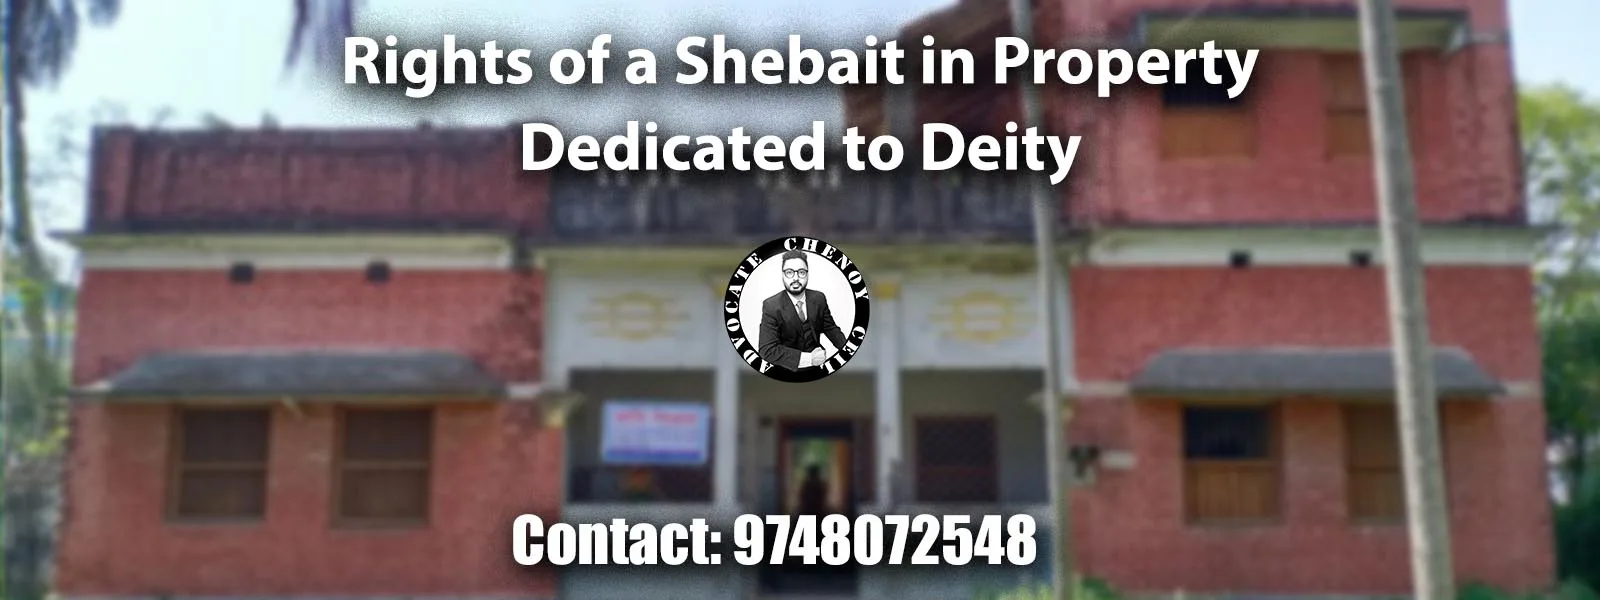 rights of a shebait in property